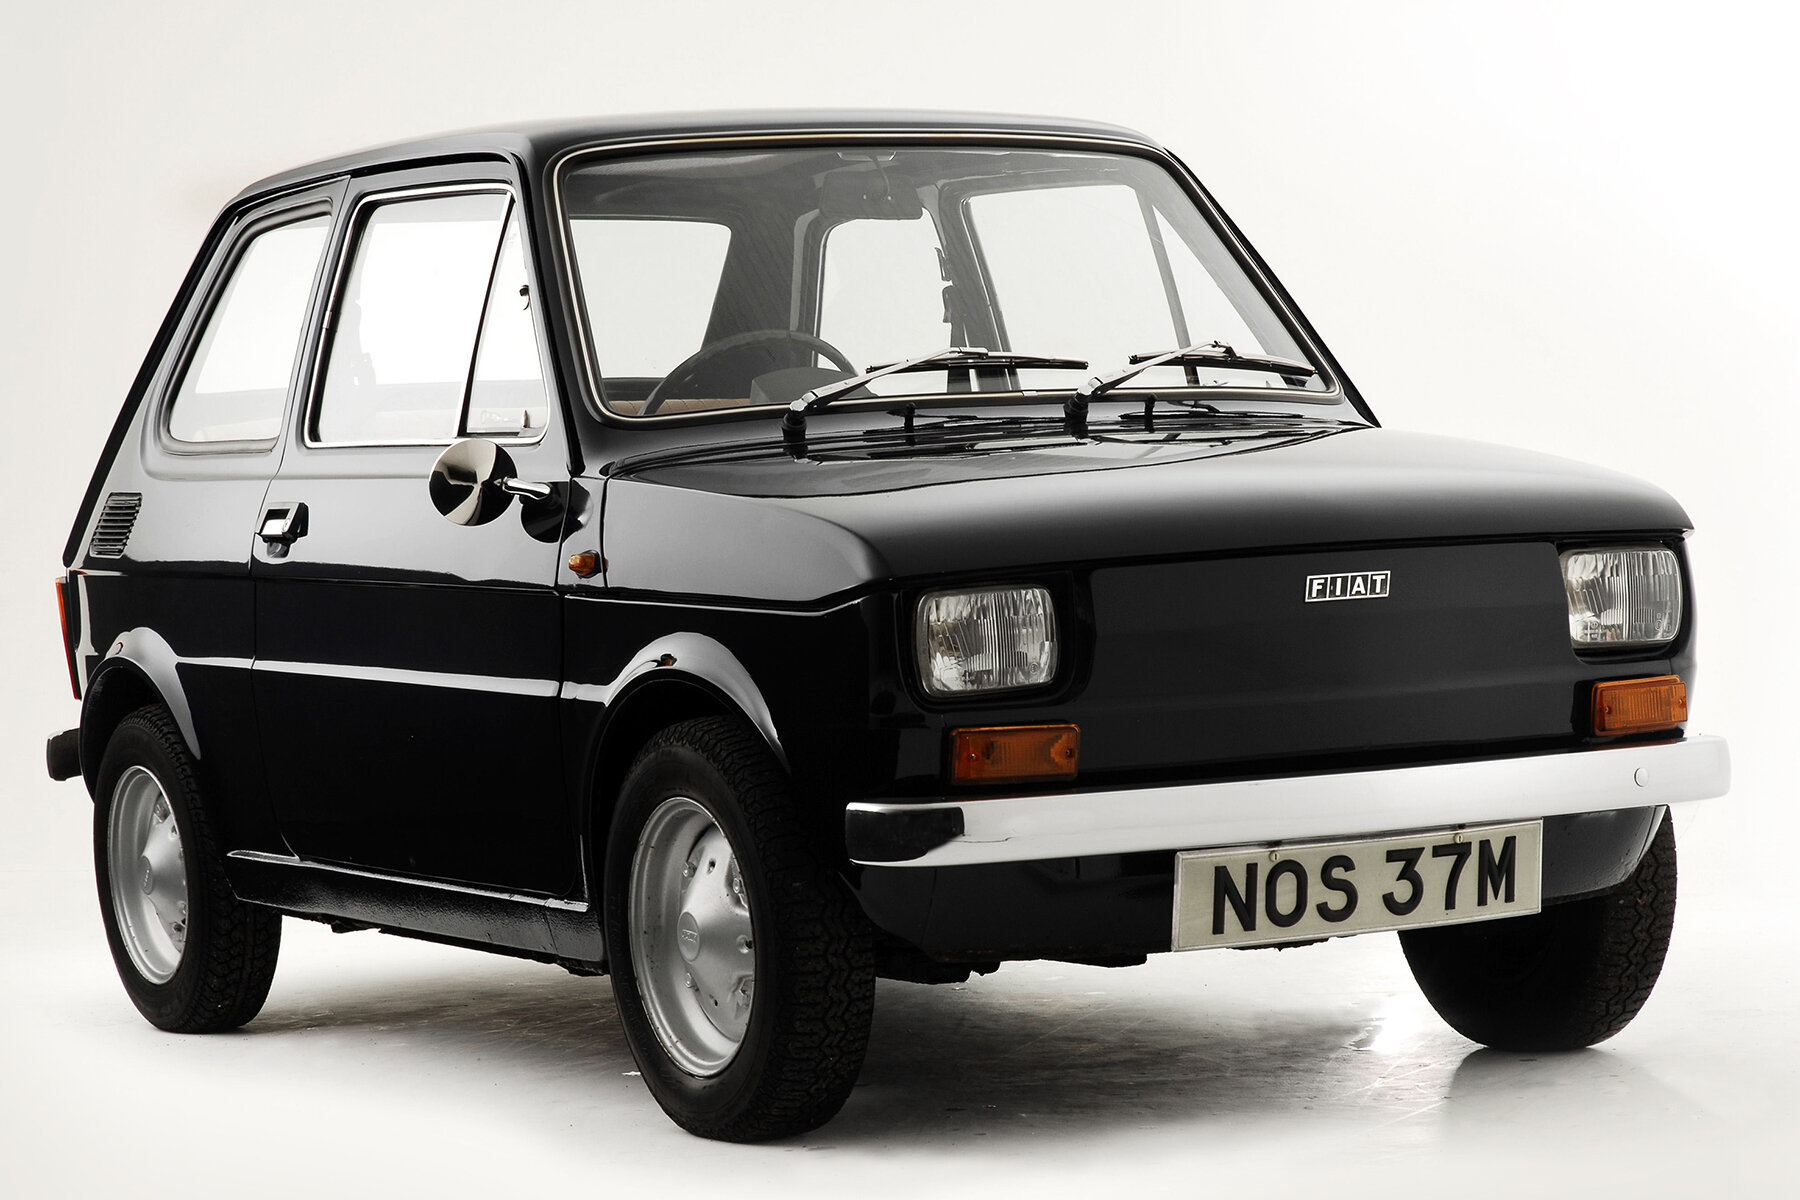 In a era of front-wheel drive superminis, the Fiat 126 remained stubbornly rear-engined – today, it’s the car’s classic scene signature.